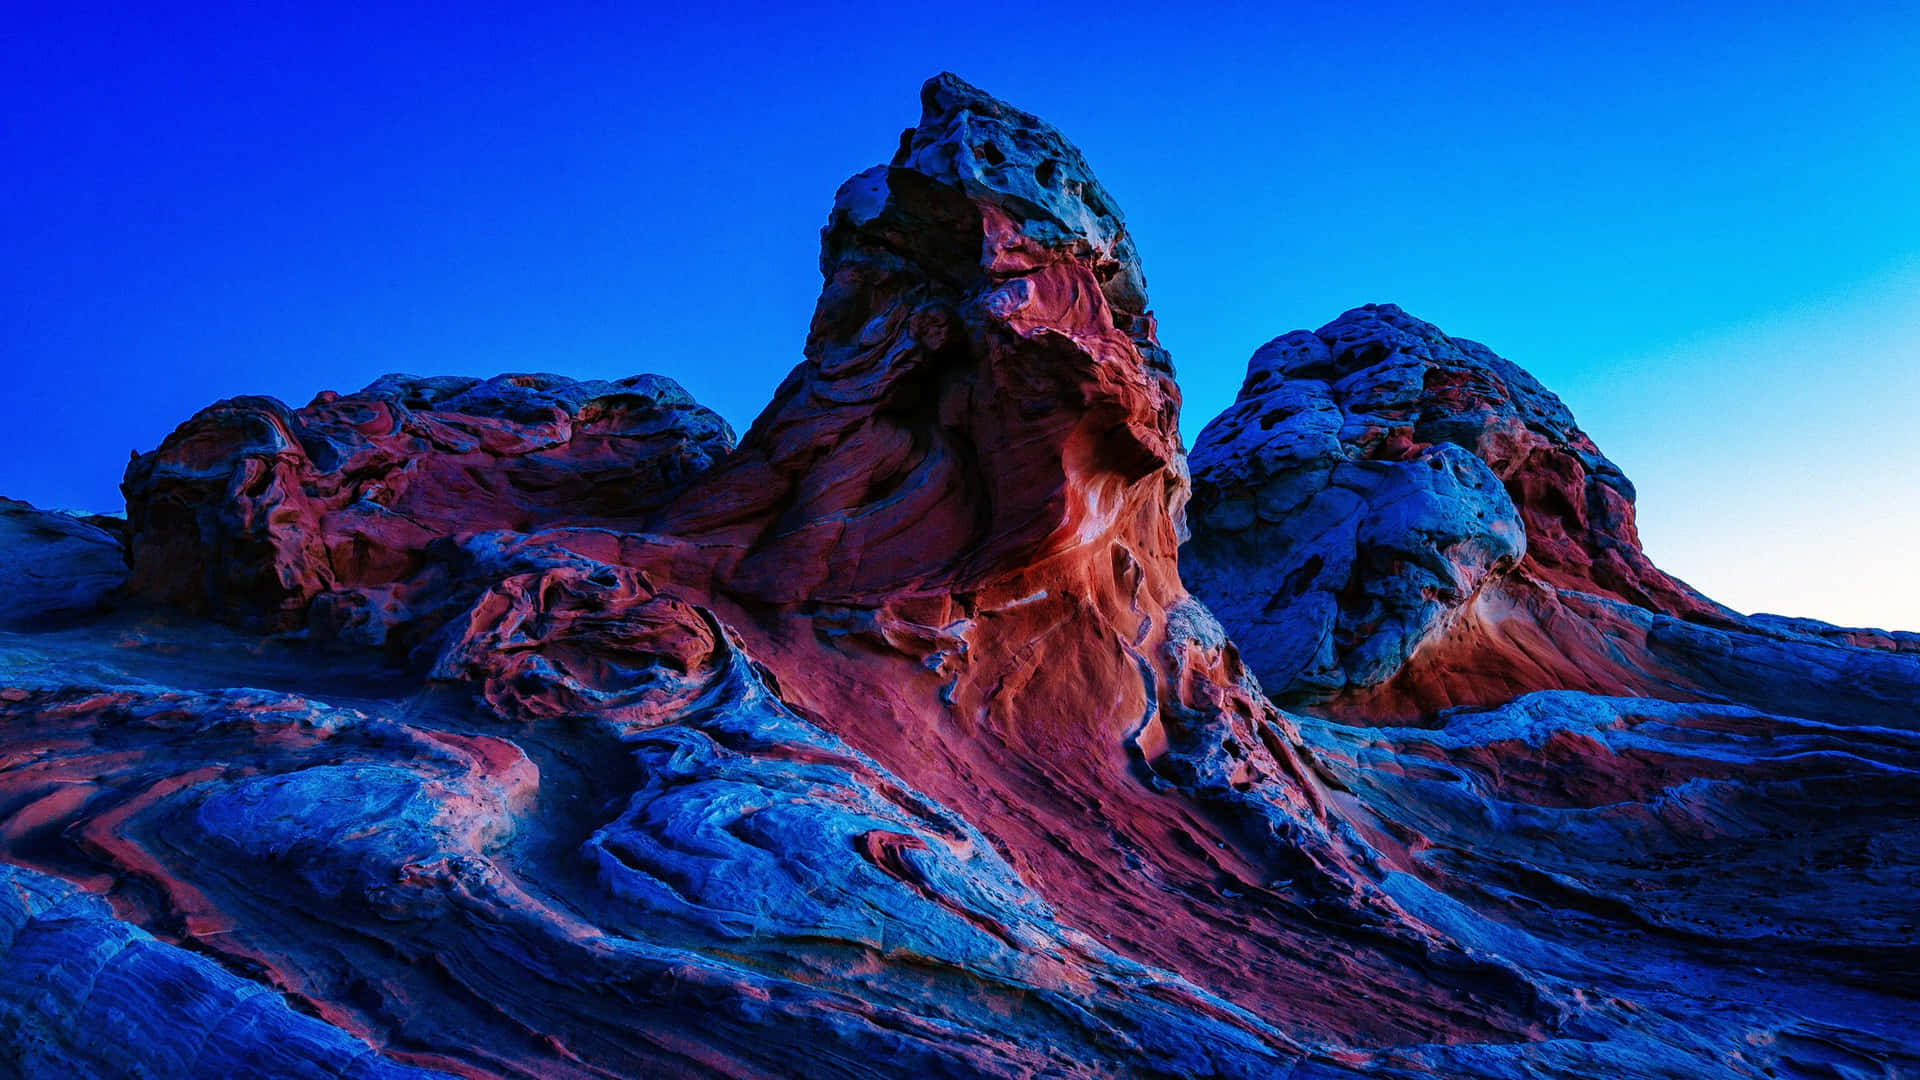 A Red And Blue Rock Formation In The Desert